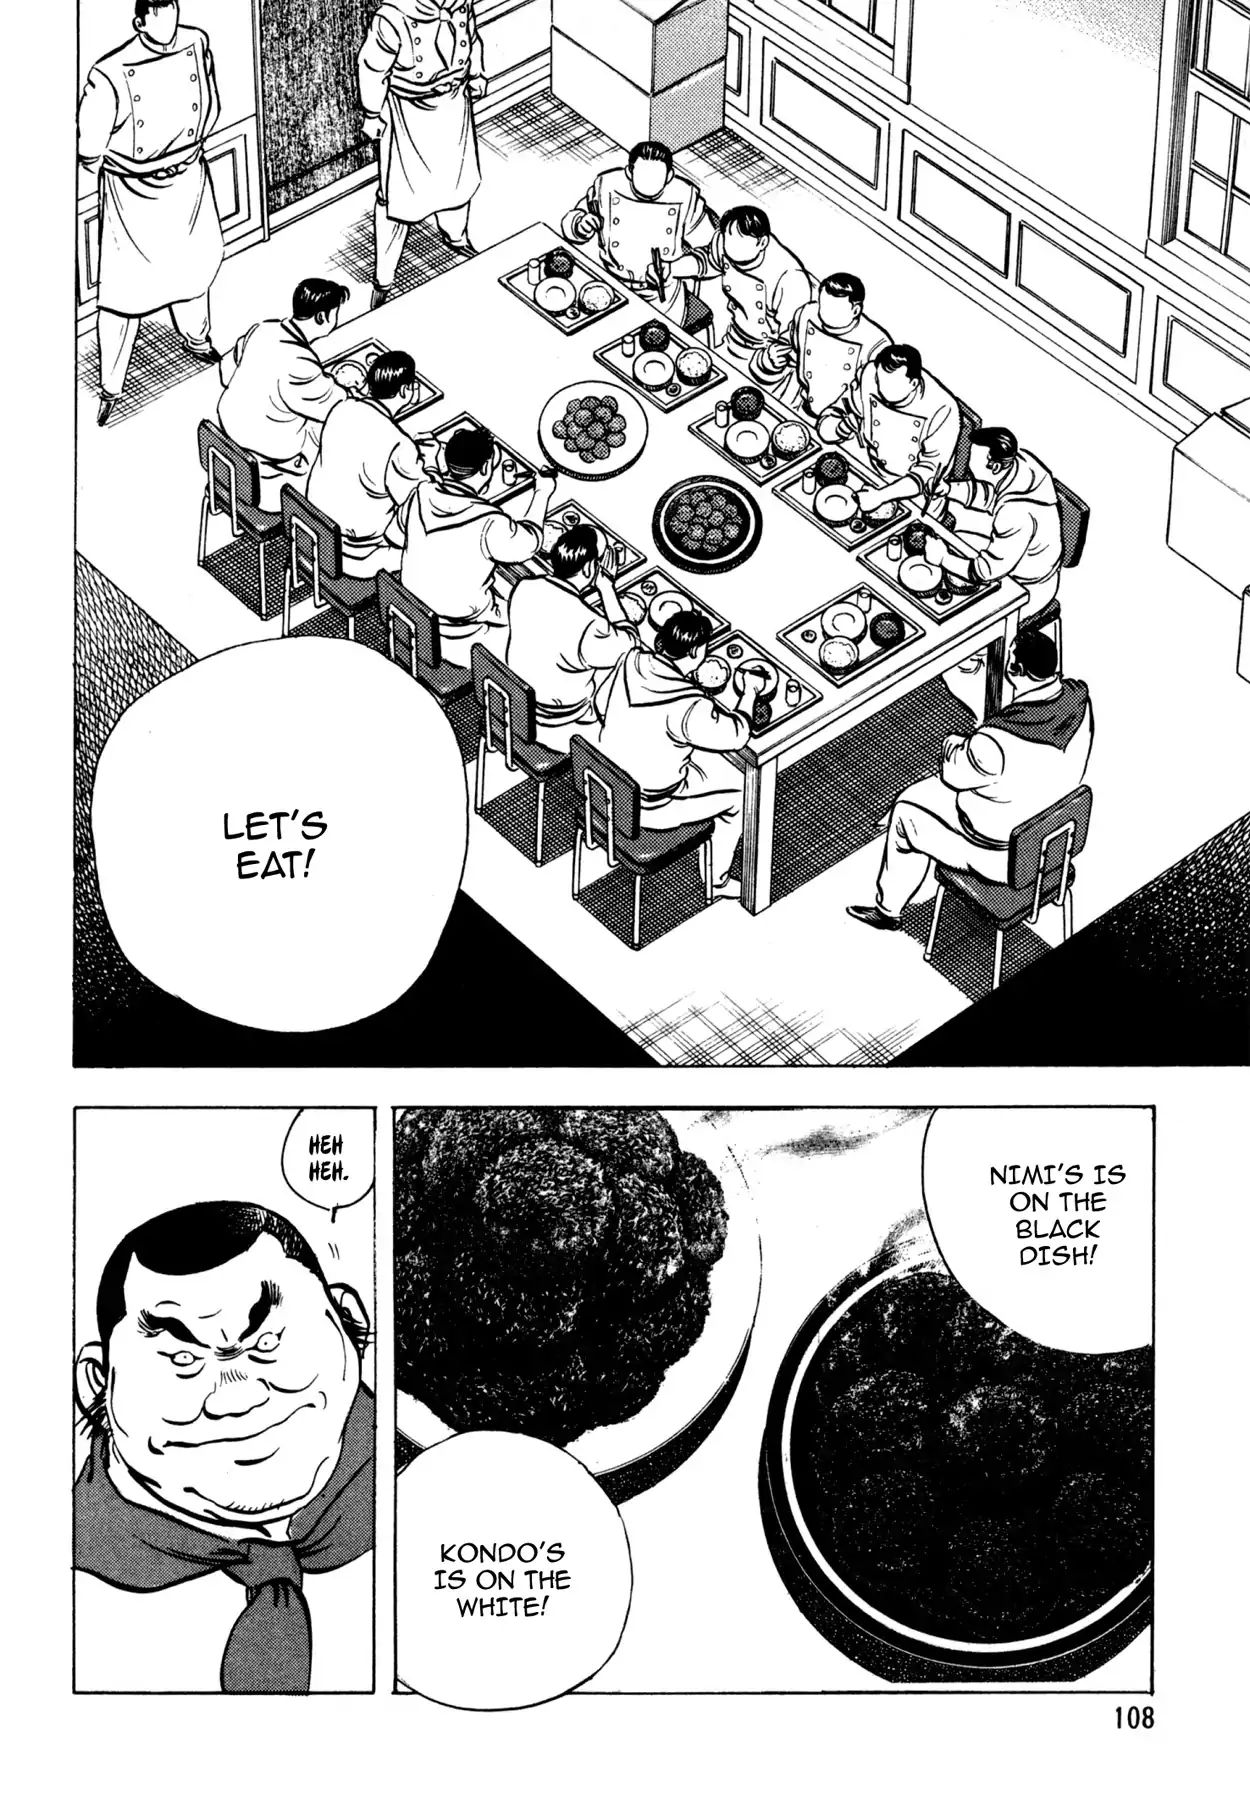 Shoku King VOL.8 CHAPTER 66: THE STAFF MEAL COOK-OFF